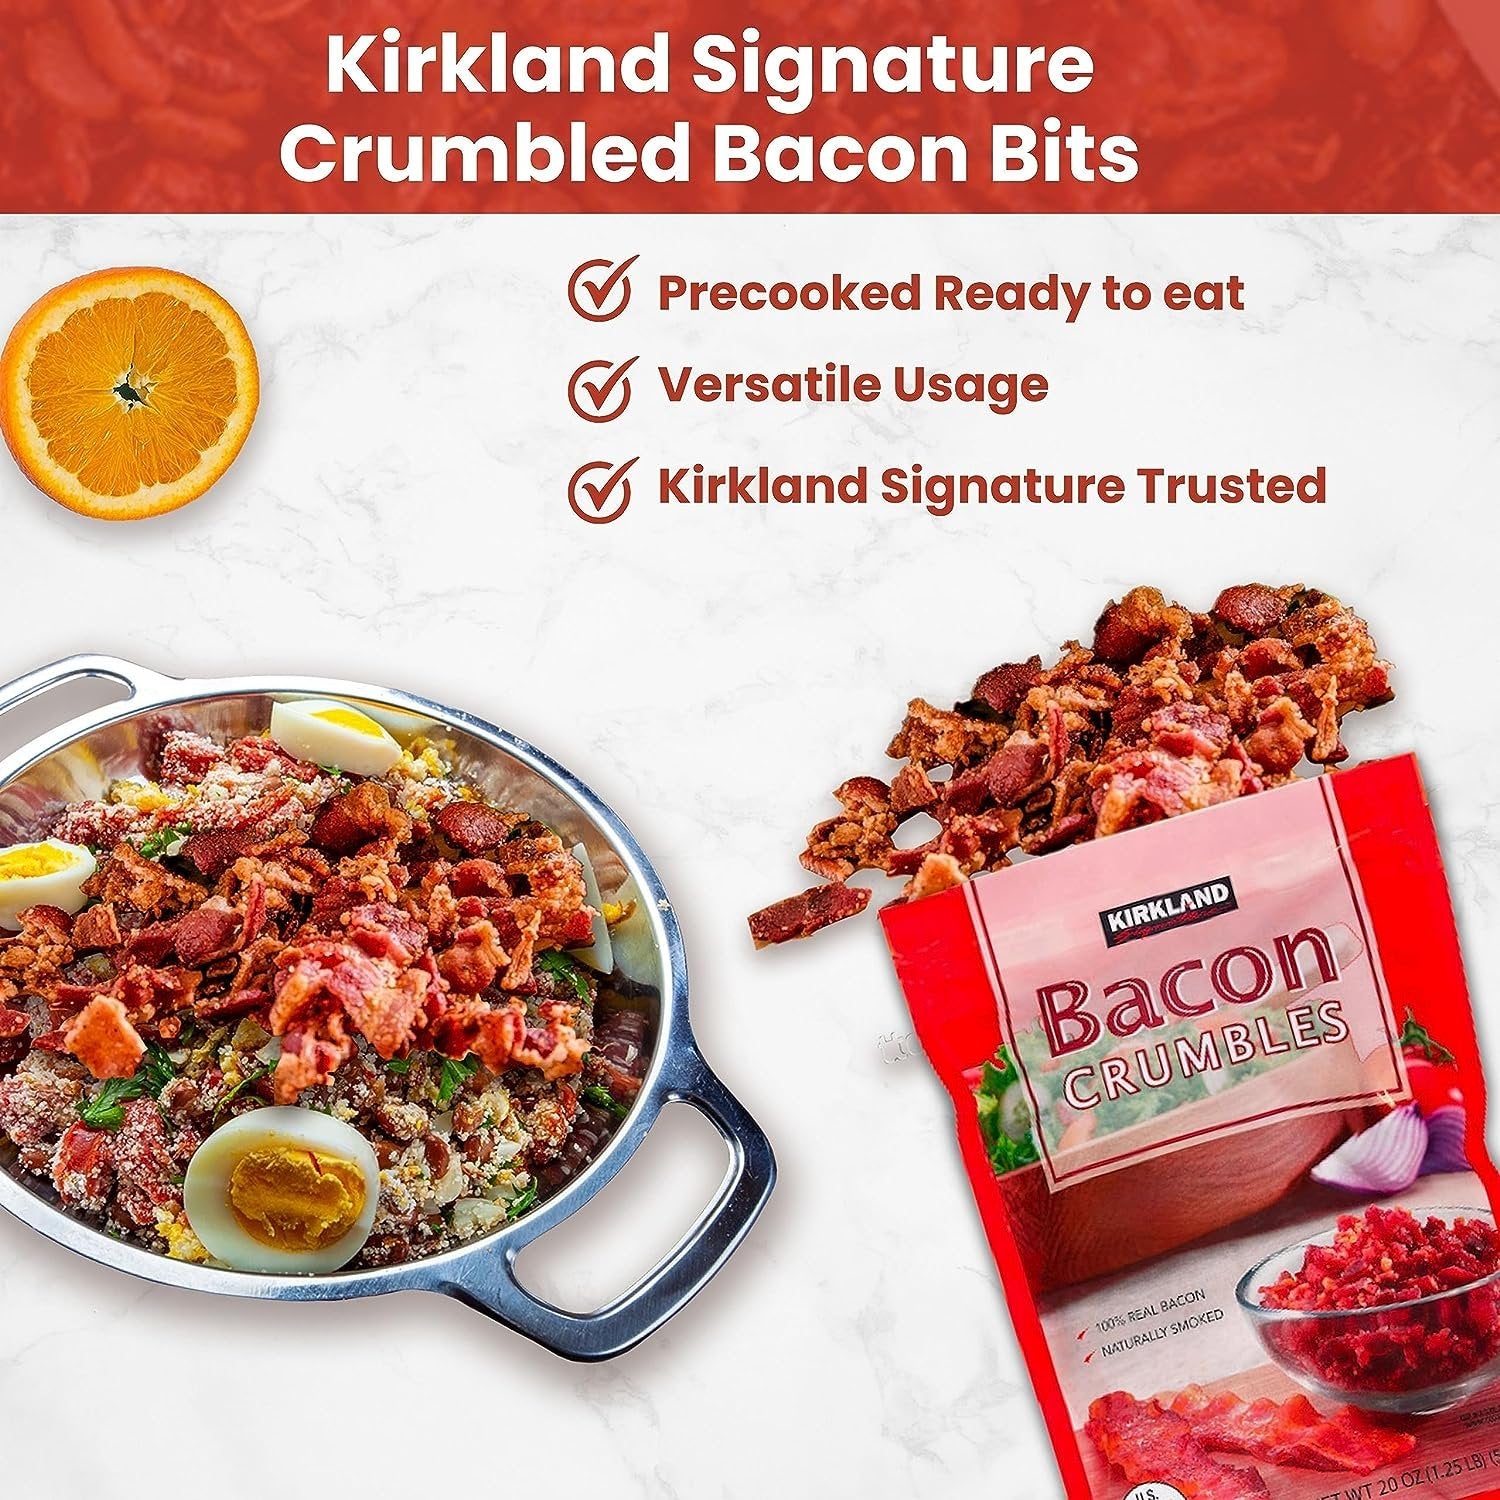 Kirkland Signature Crumbled Bacon Bits - Irresistibly Flavorful Cooked Bacon - Bacon Cooked Ready To Eat, Premium Quality 20oz with Bacon Bits Real for Culinary Creations - 3 Pack Bacon Bits For Salad